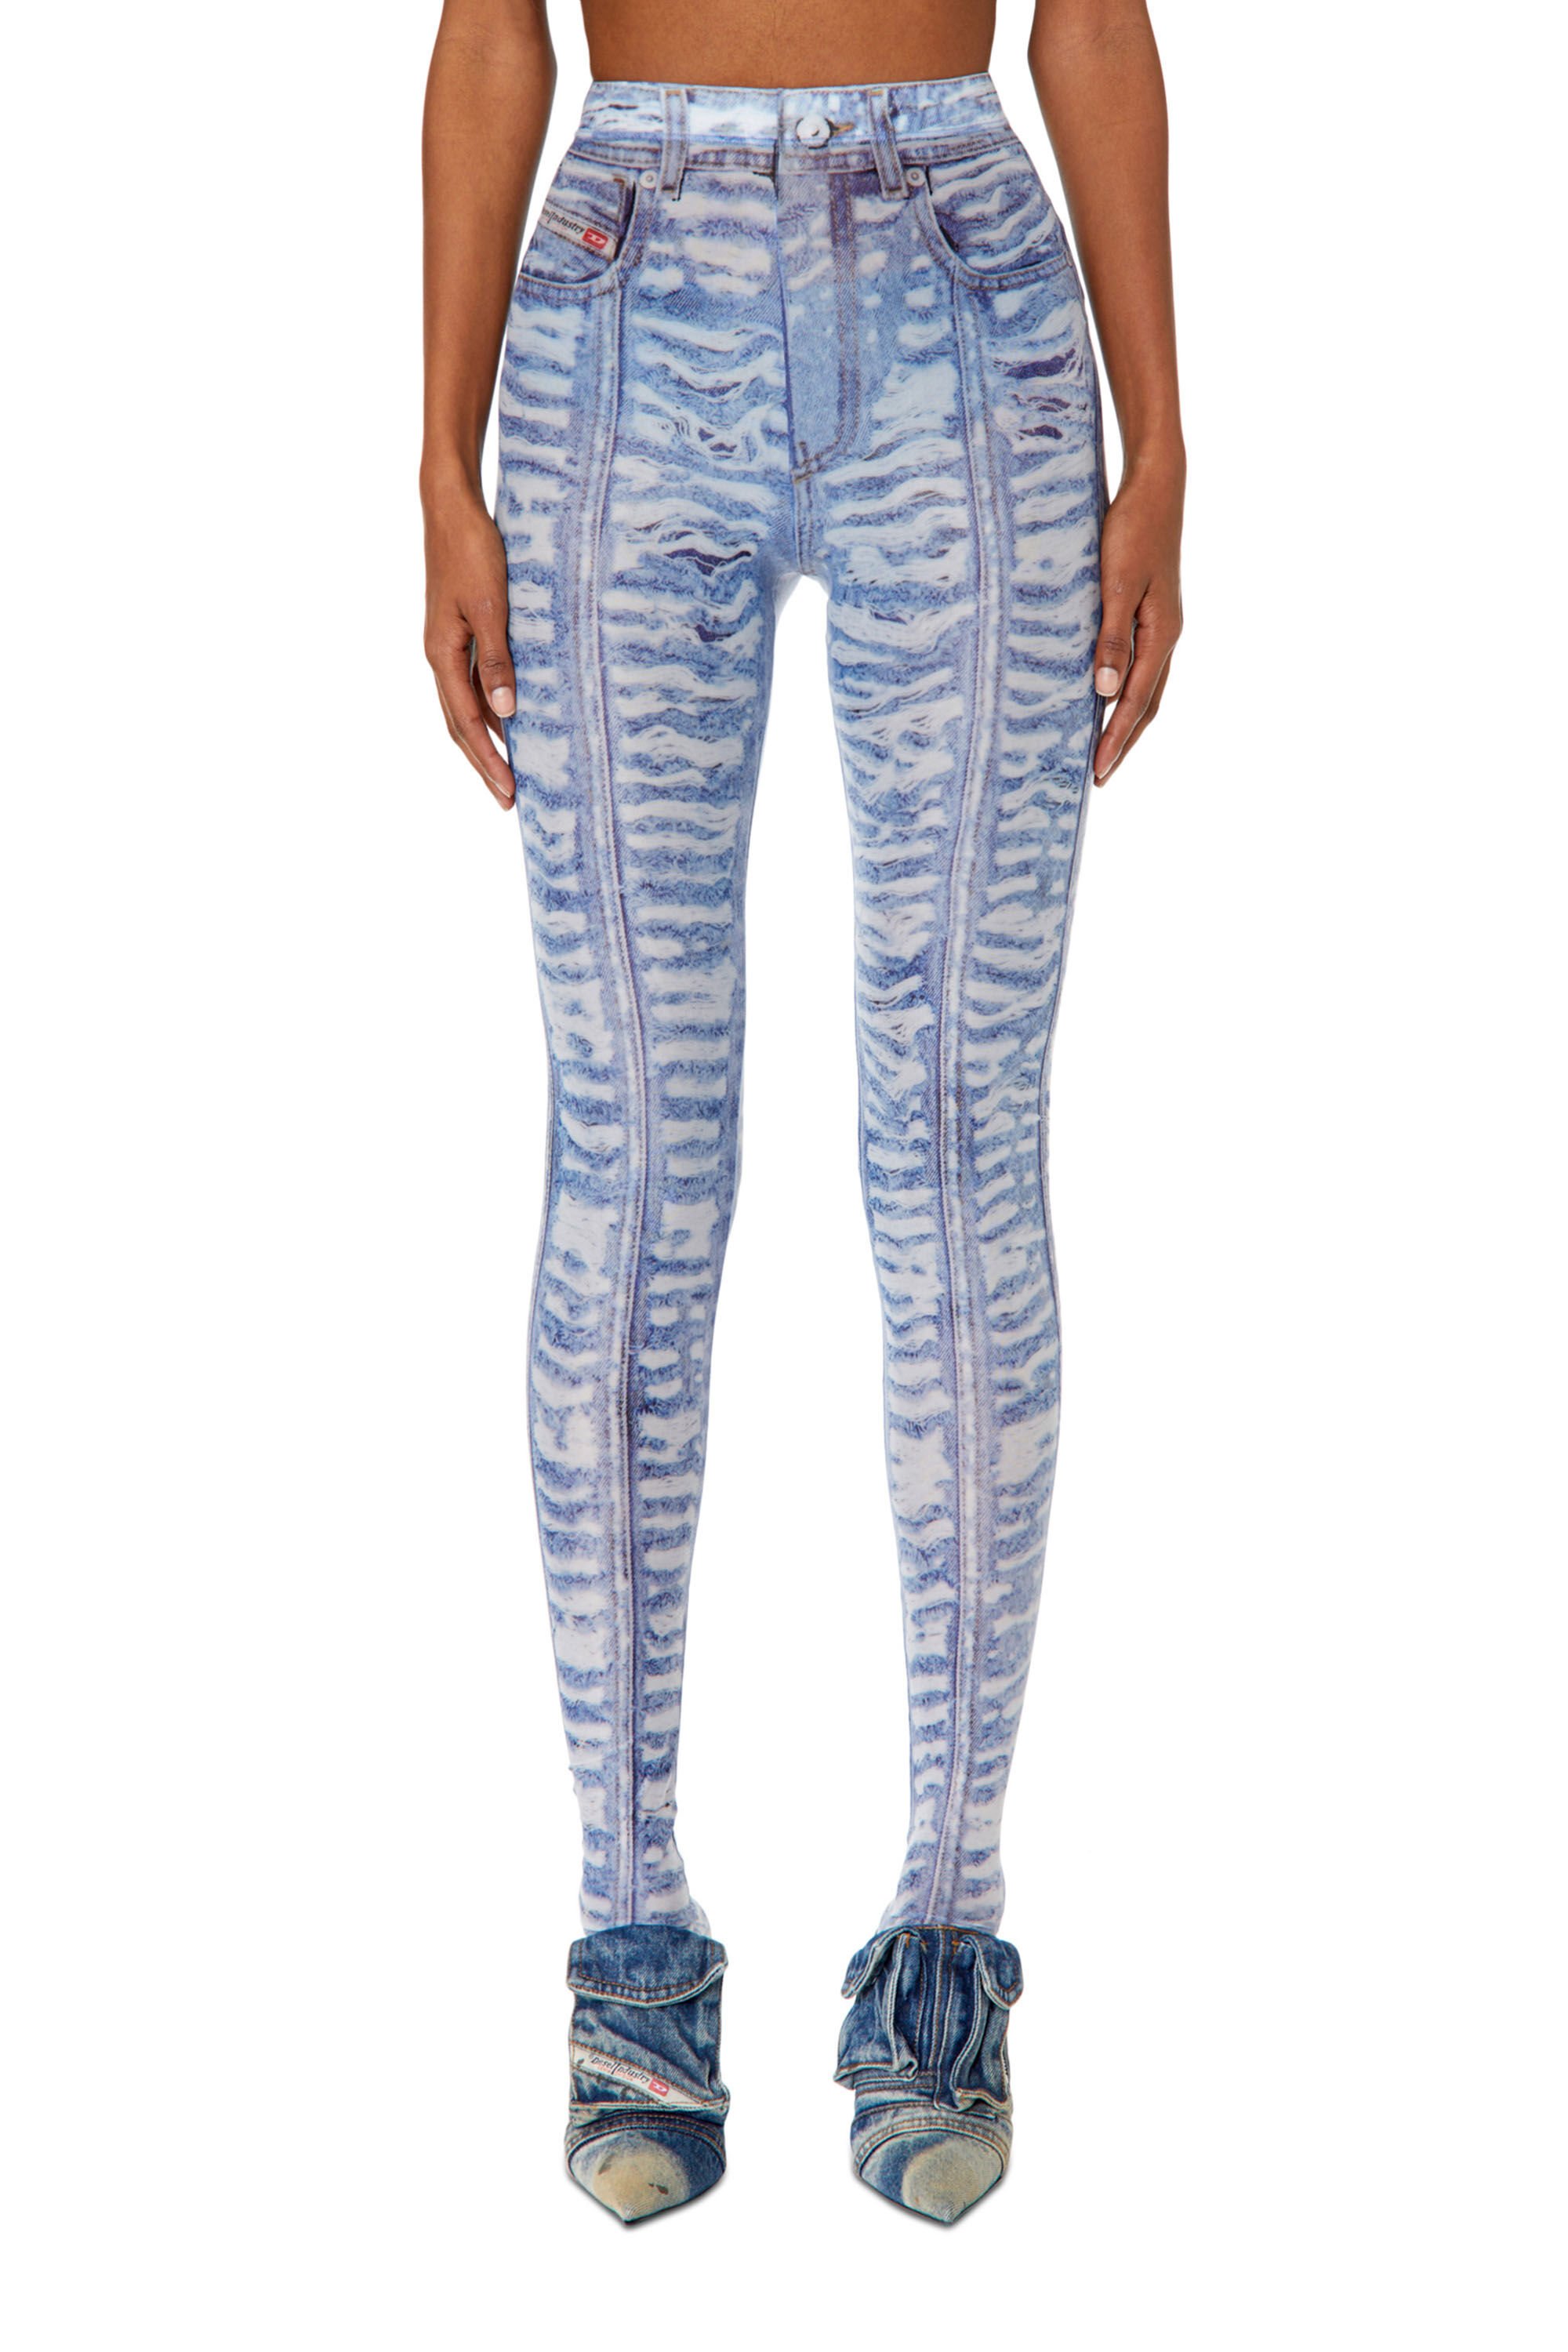 Buy Diesel women blue graphic printed p-koll-d1 tights for $113 online on  SV77, A059030EIAJ141A